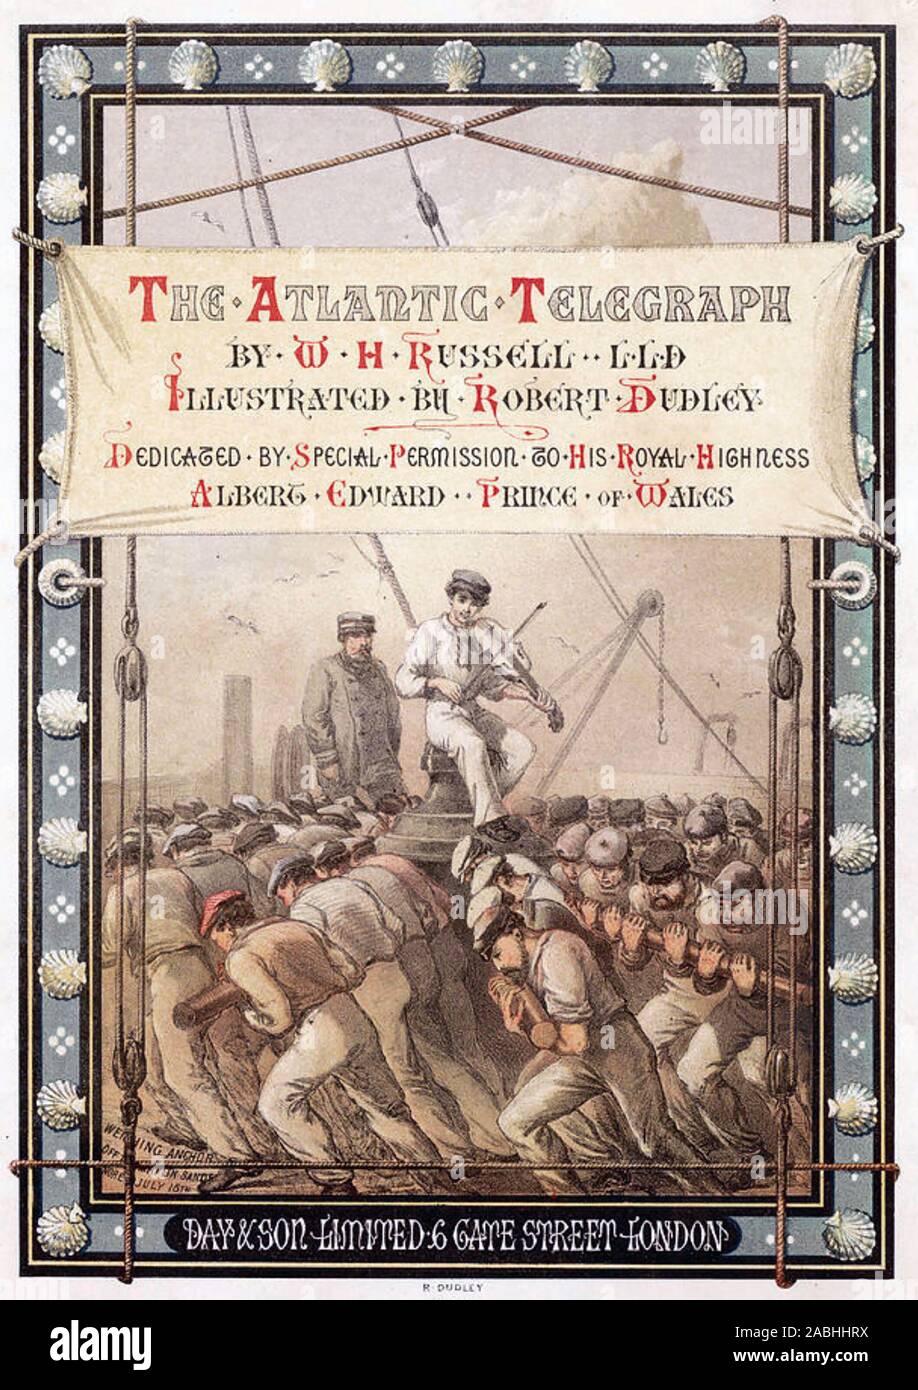 ATLANTIC TELEGRAPH COMPANY The 1865 book celebrating the laying of the commercial telegraph cable across by the Atlantic by the Great Eastern, written by the Times correspondent W.H. Russell Stock Photo